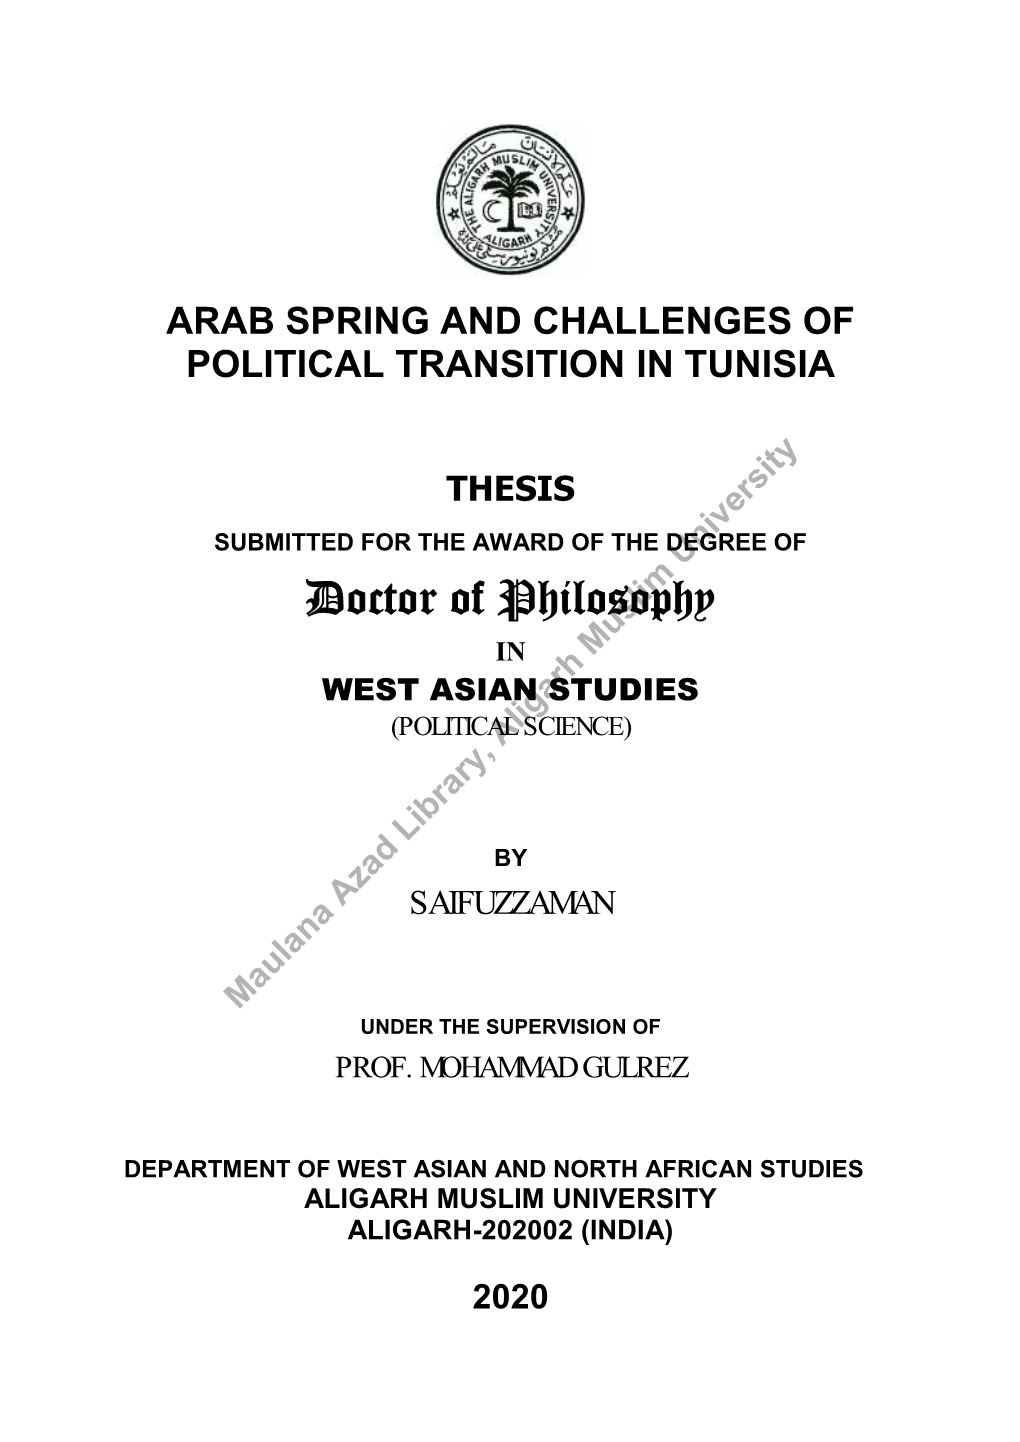 Arab Spring and Challenges of Political Transition in Tunisia